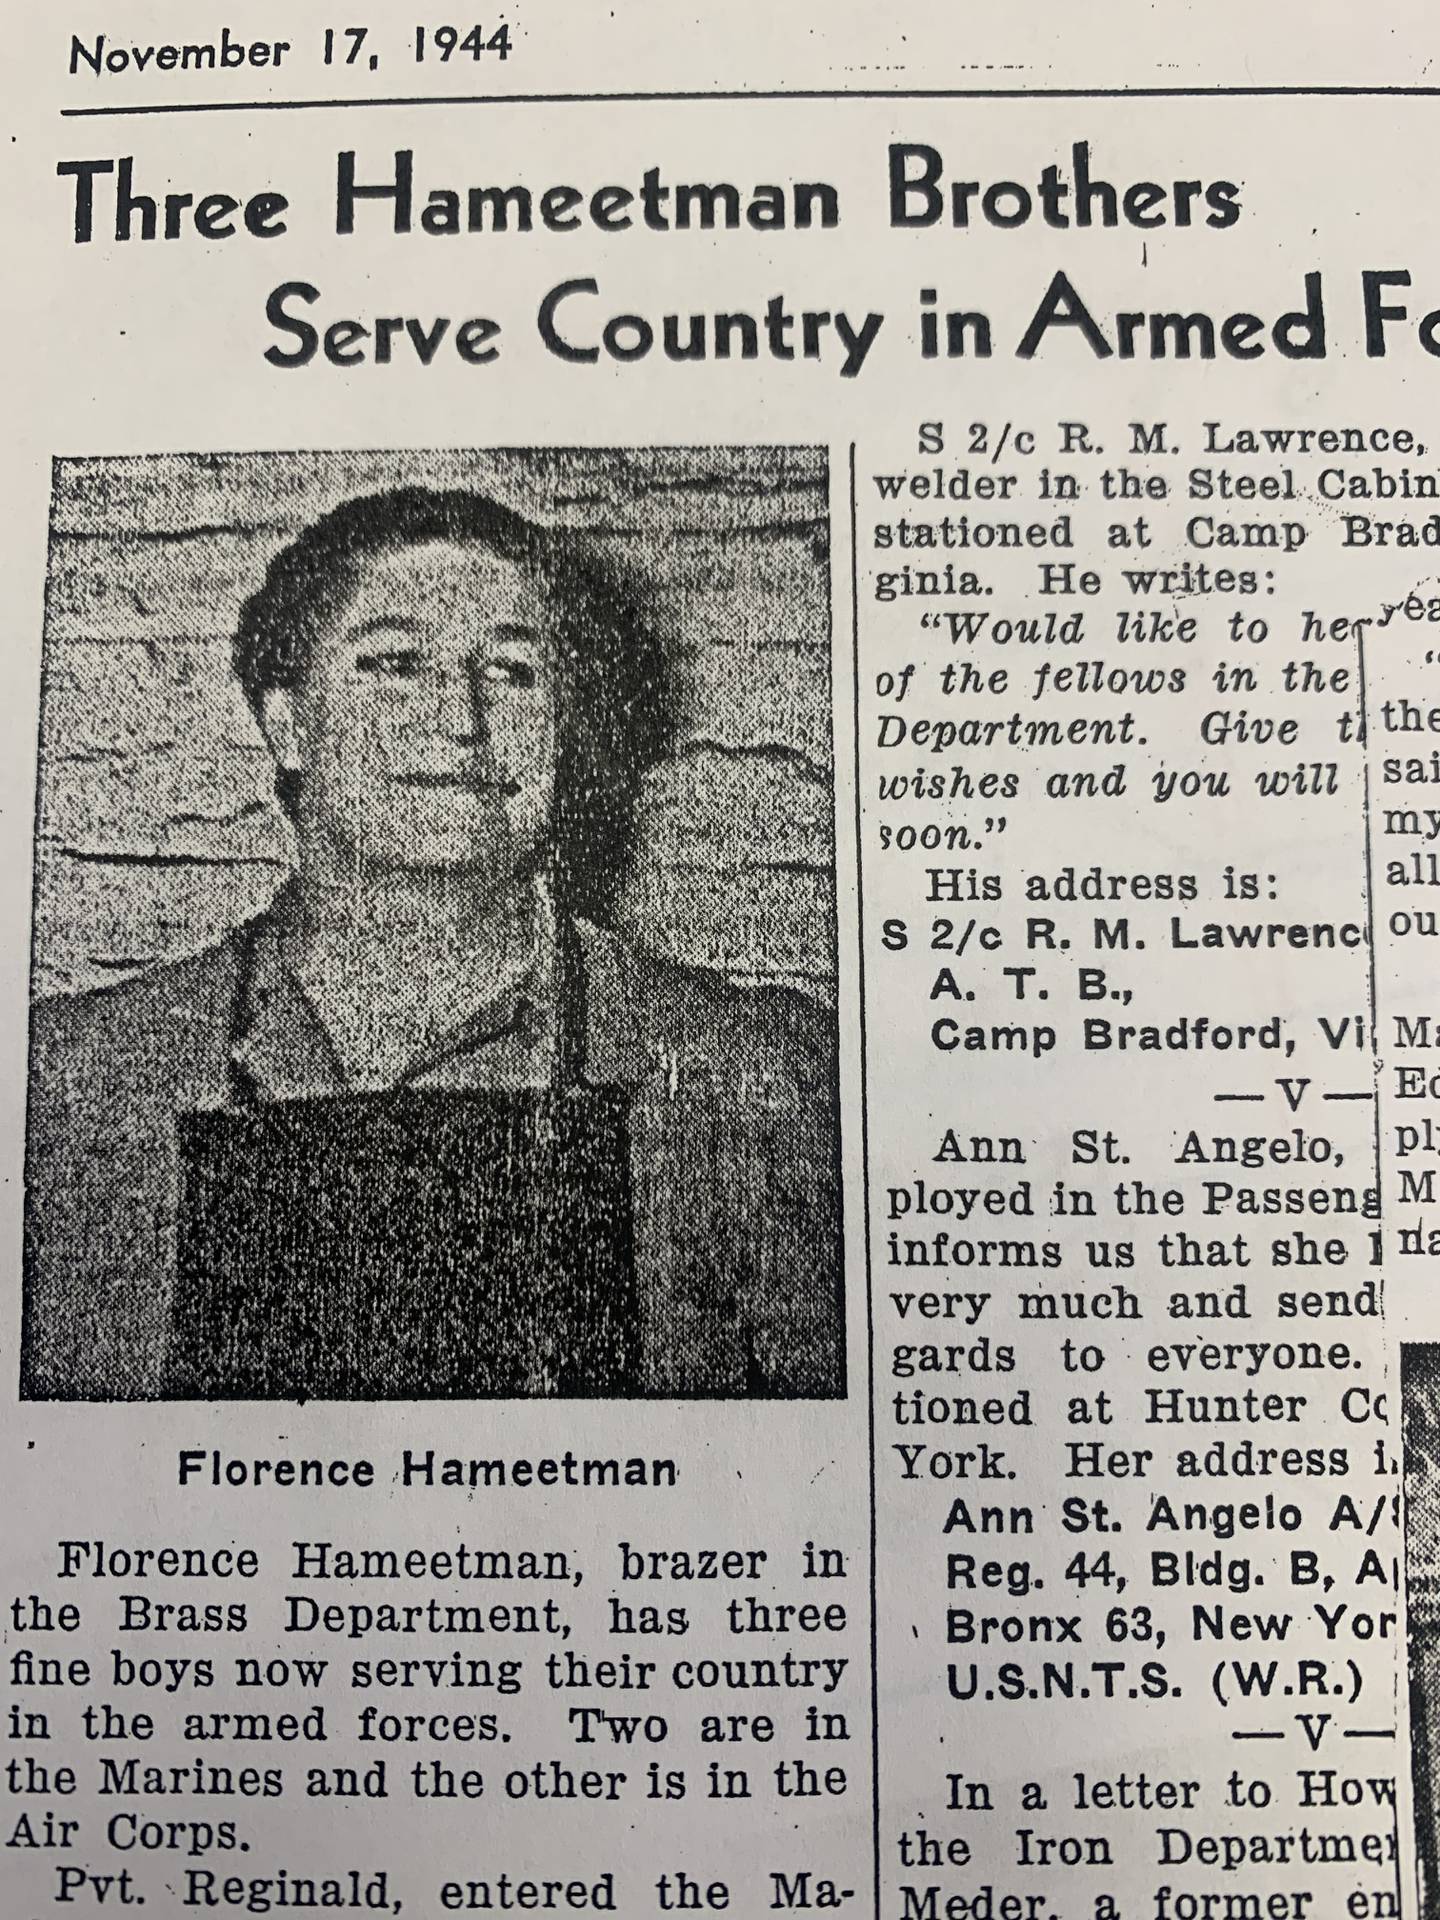 Florence Hameetman, a welder for Pullman Car Company, received letters from her three sons during World War II that they had unexpectedly met up with each other on the South Pacific Island of Guam in 1945. This newspaper clipping was provided by Florence's grandson Ronald Hameetman of Fox River Grove.